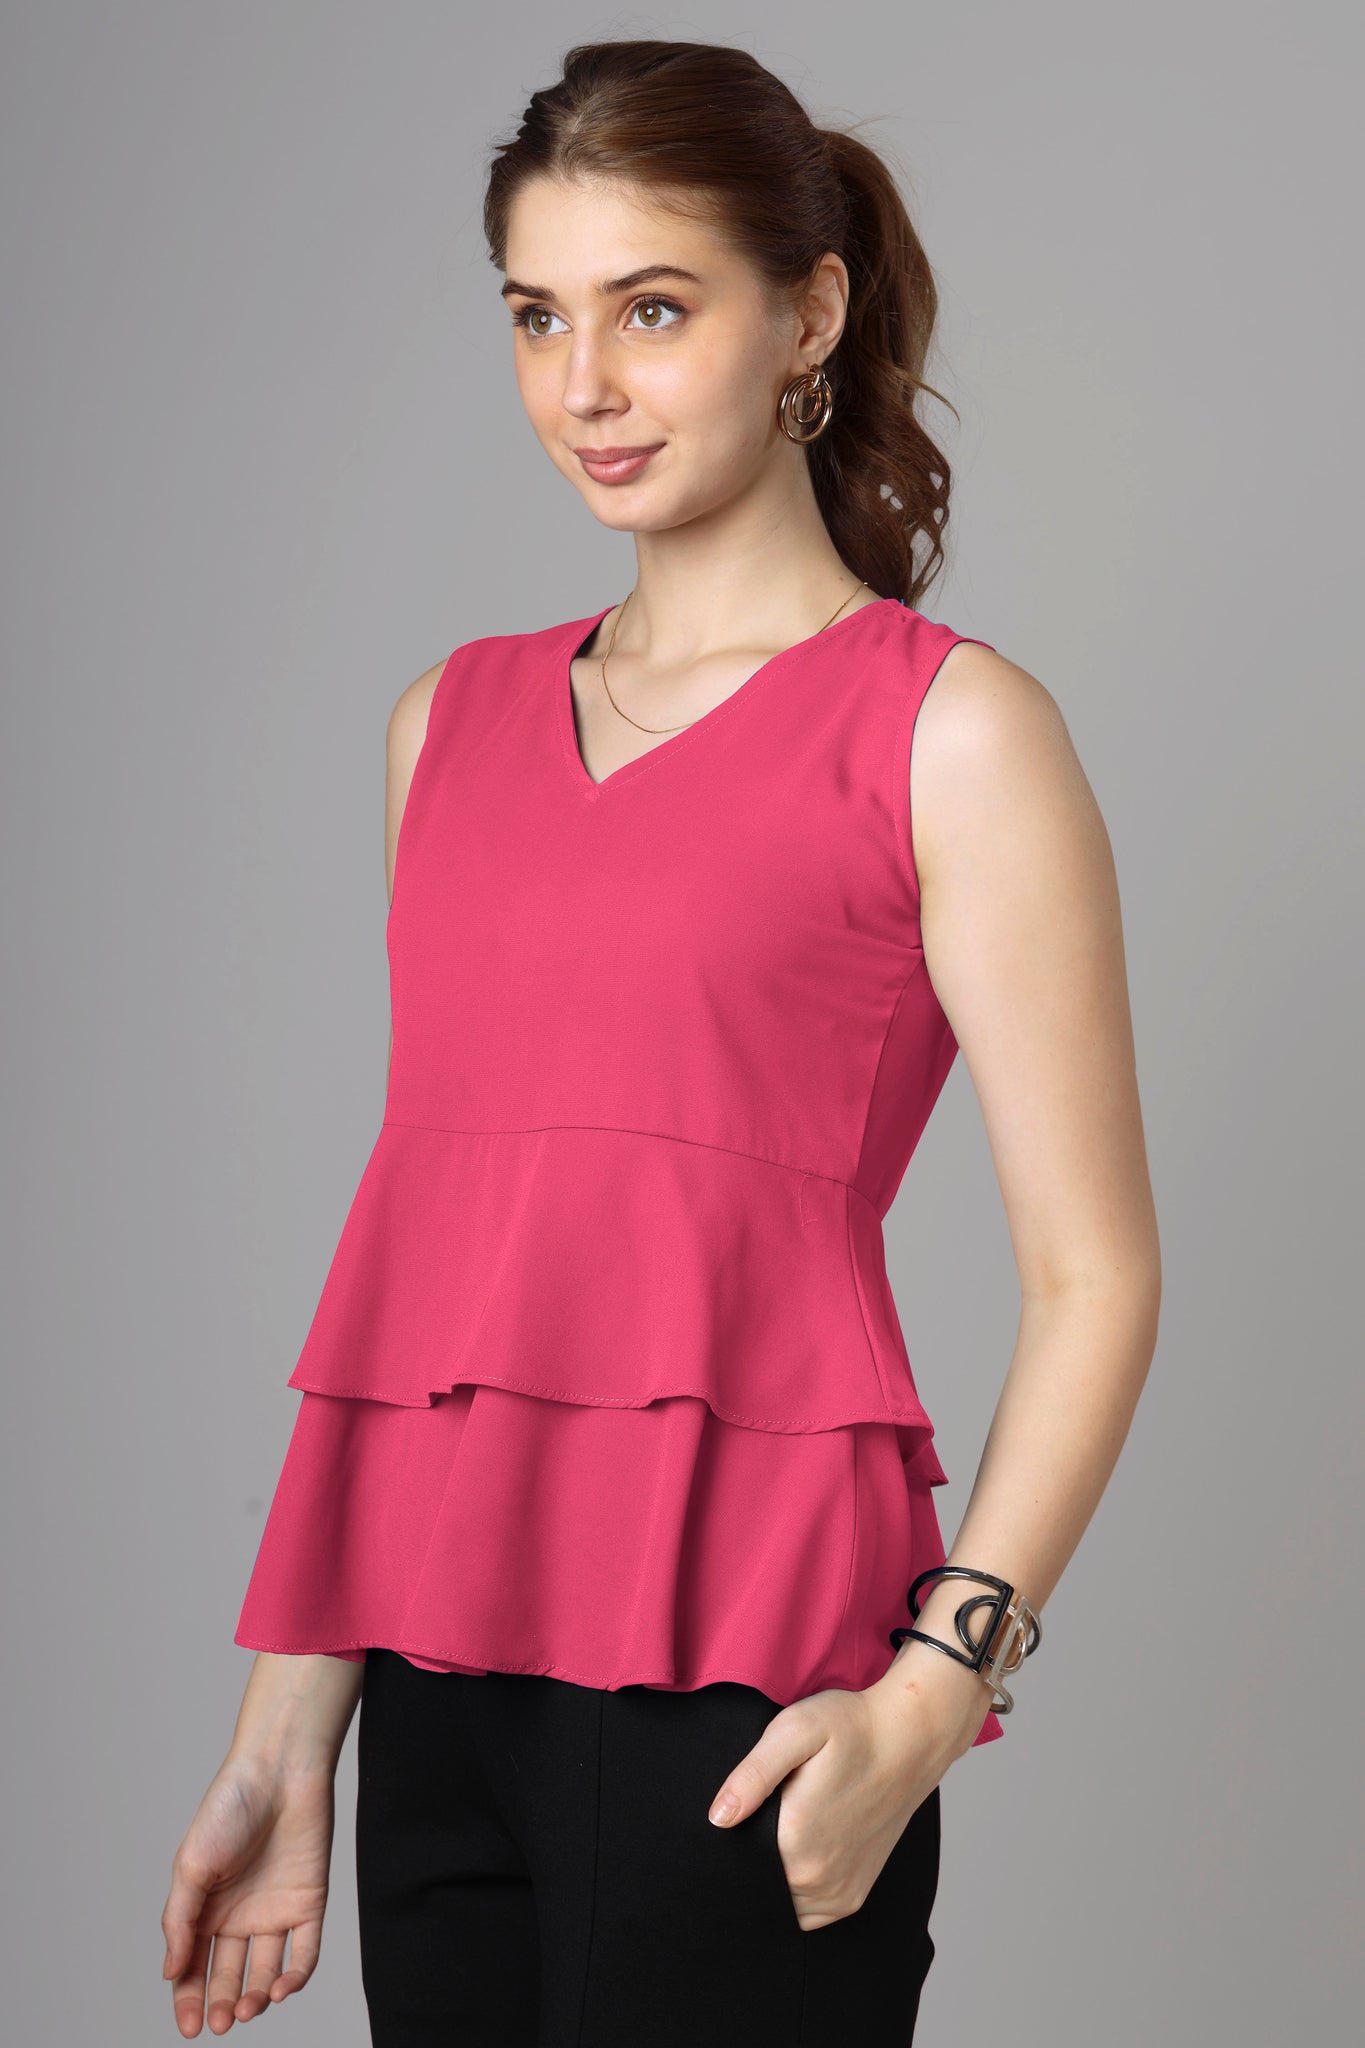 Hot Pink Casual Top For Women